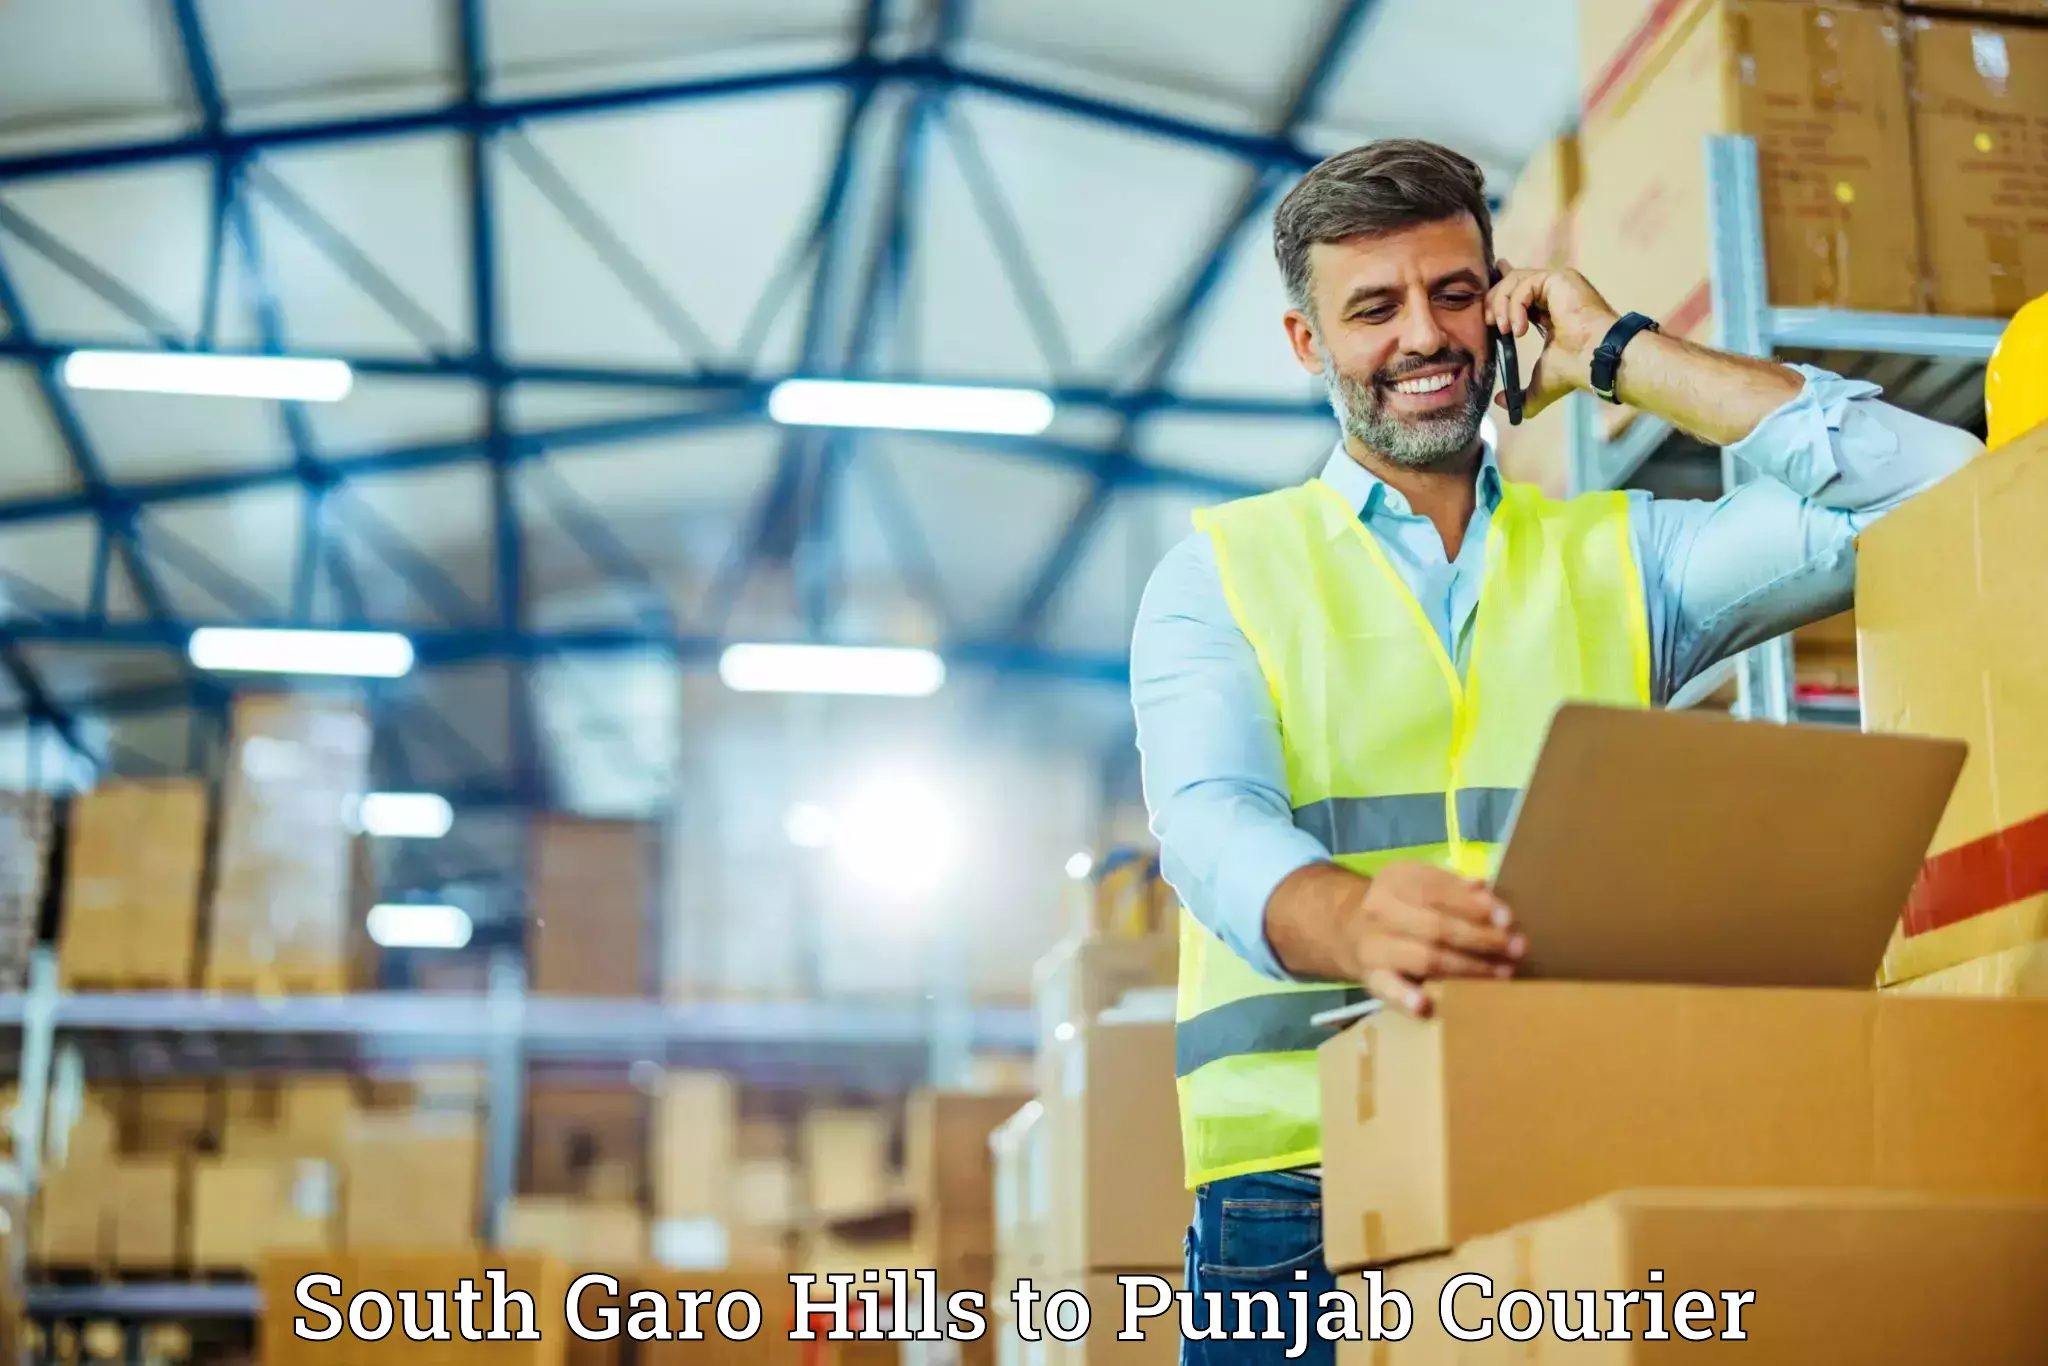 Moving and storage services in South Garo Hills to Punjab